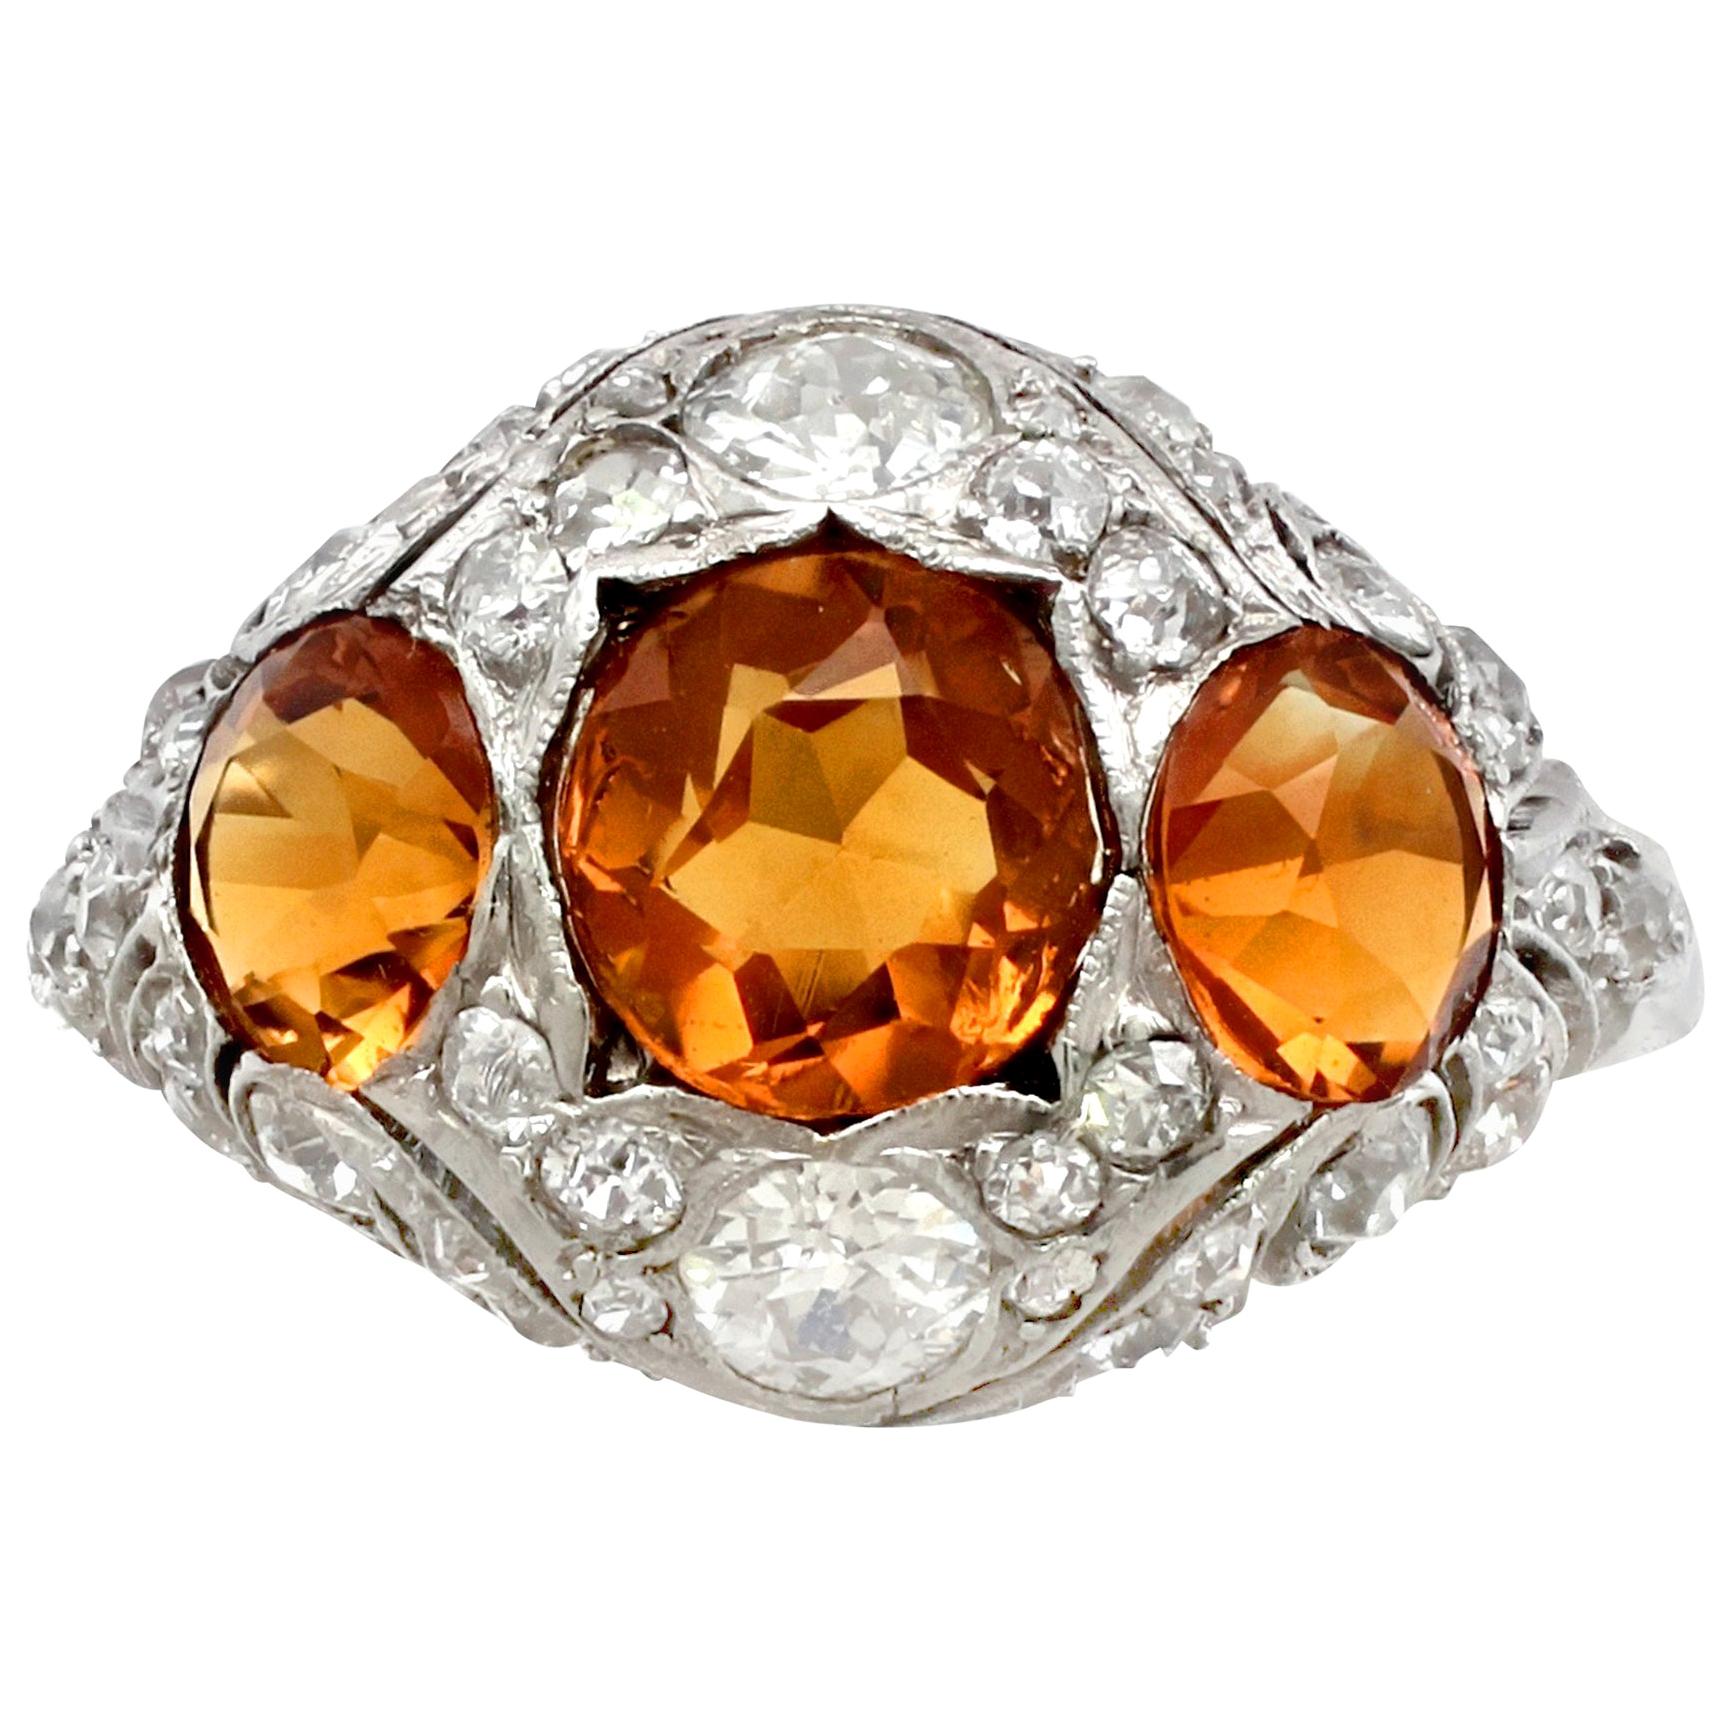 A fine and impressive antique 2.55 carat citrine and 0.66 carat diamond dress ring; part of our antique jewelry and estate jewelry collections.

This fine original antique citrine ring has been crafted in 14k white gold.

The impressive domed